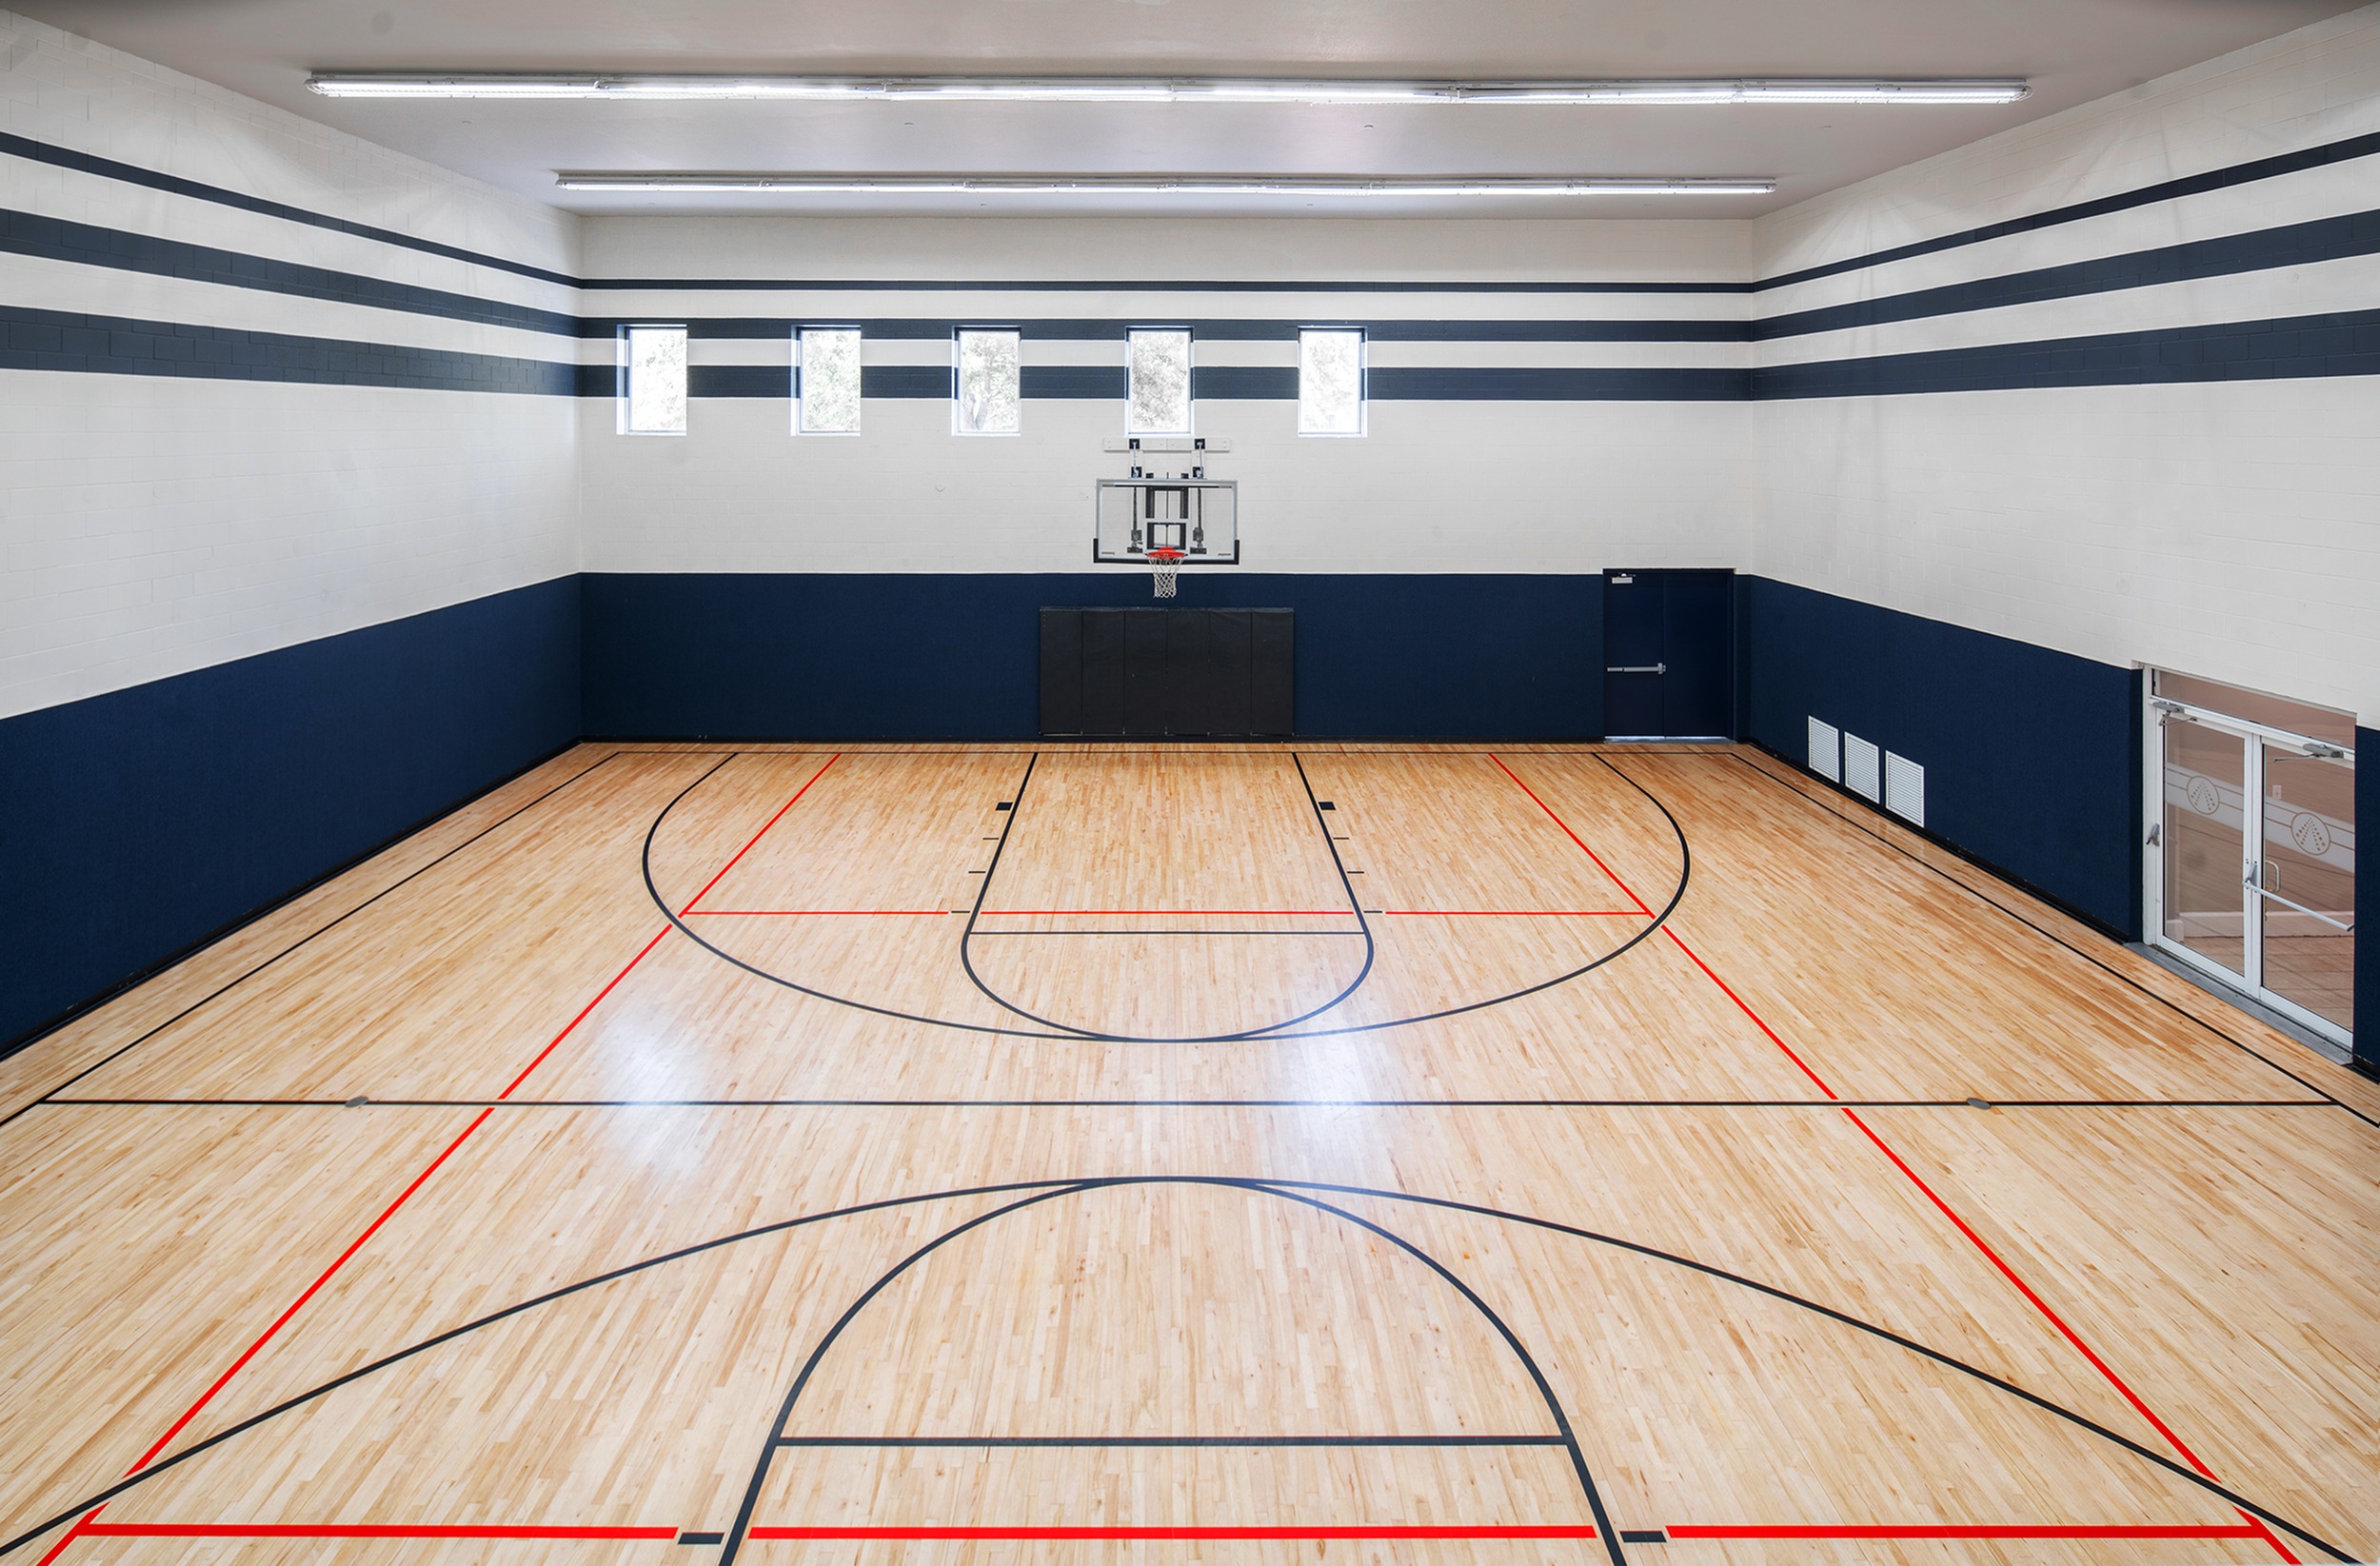 Full-size indoor basketball court